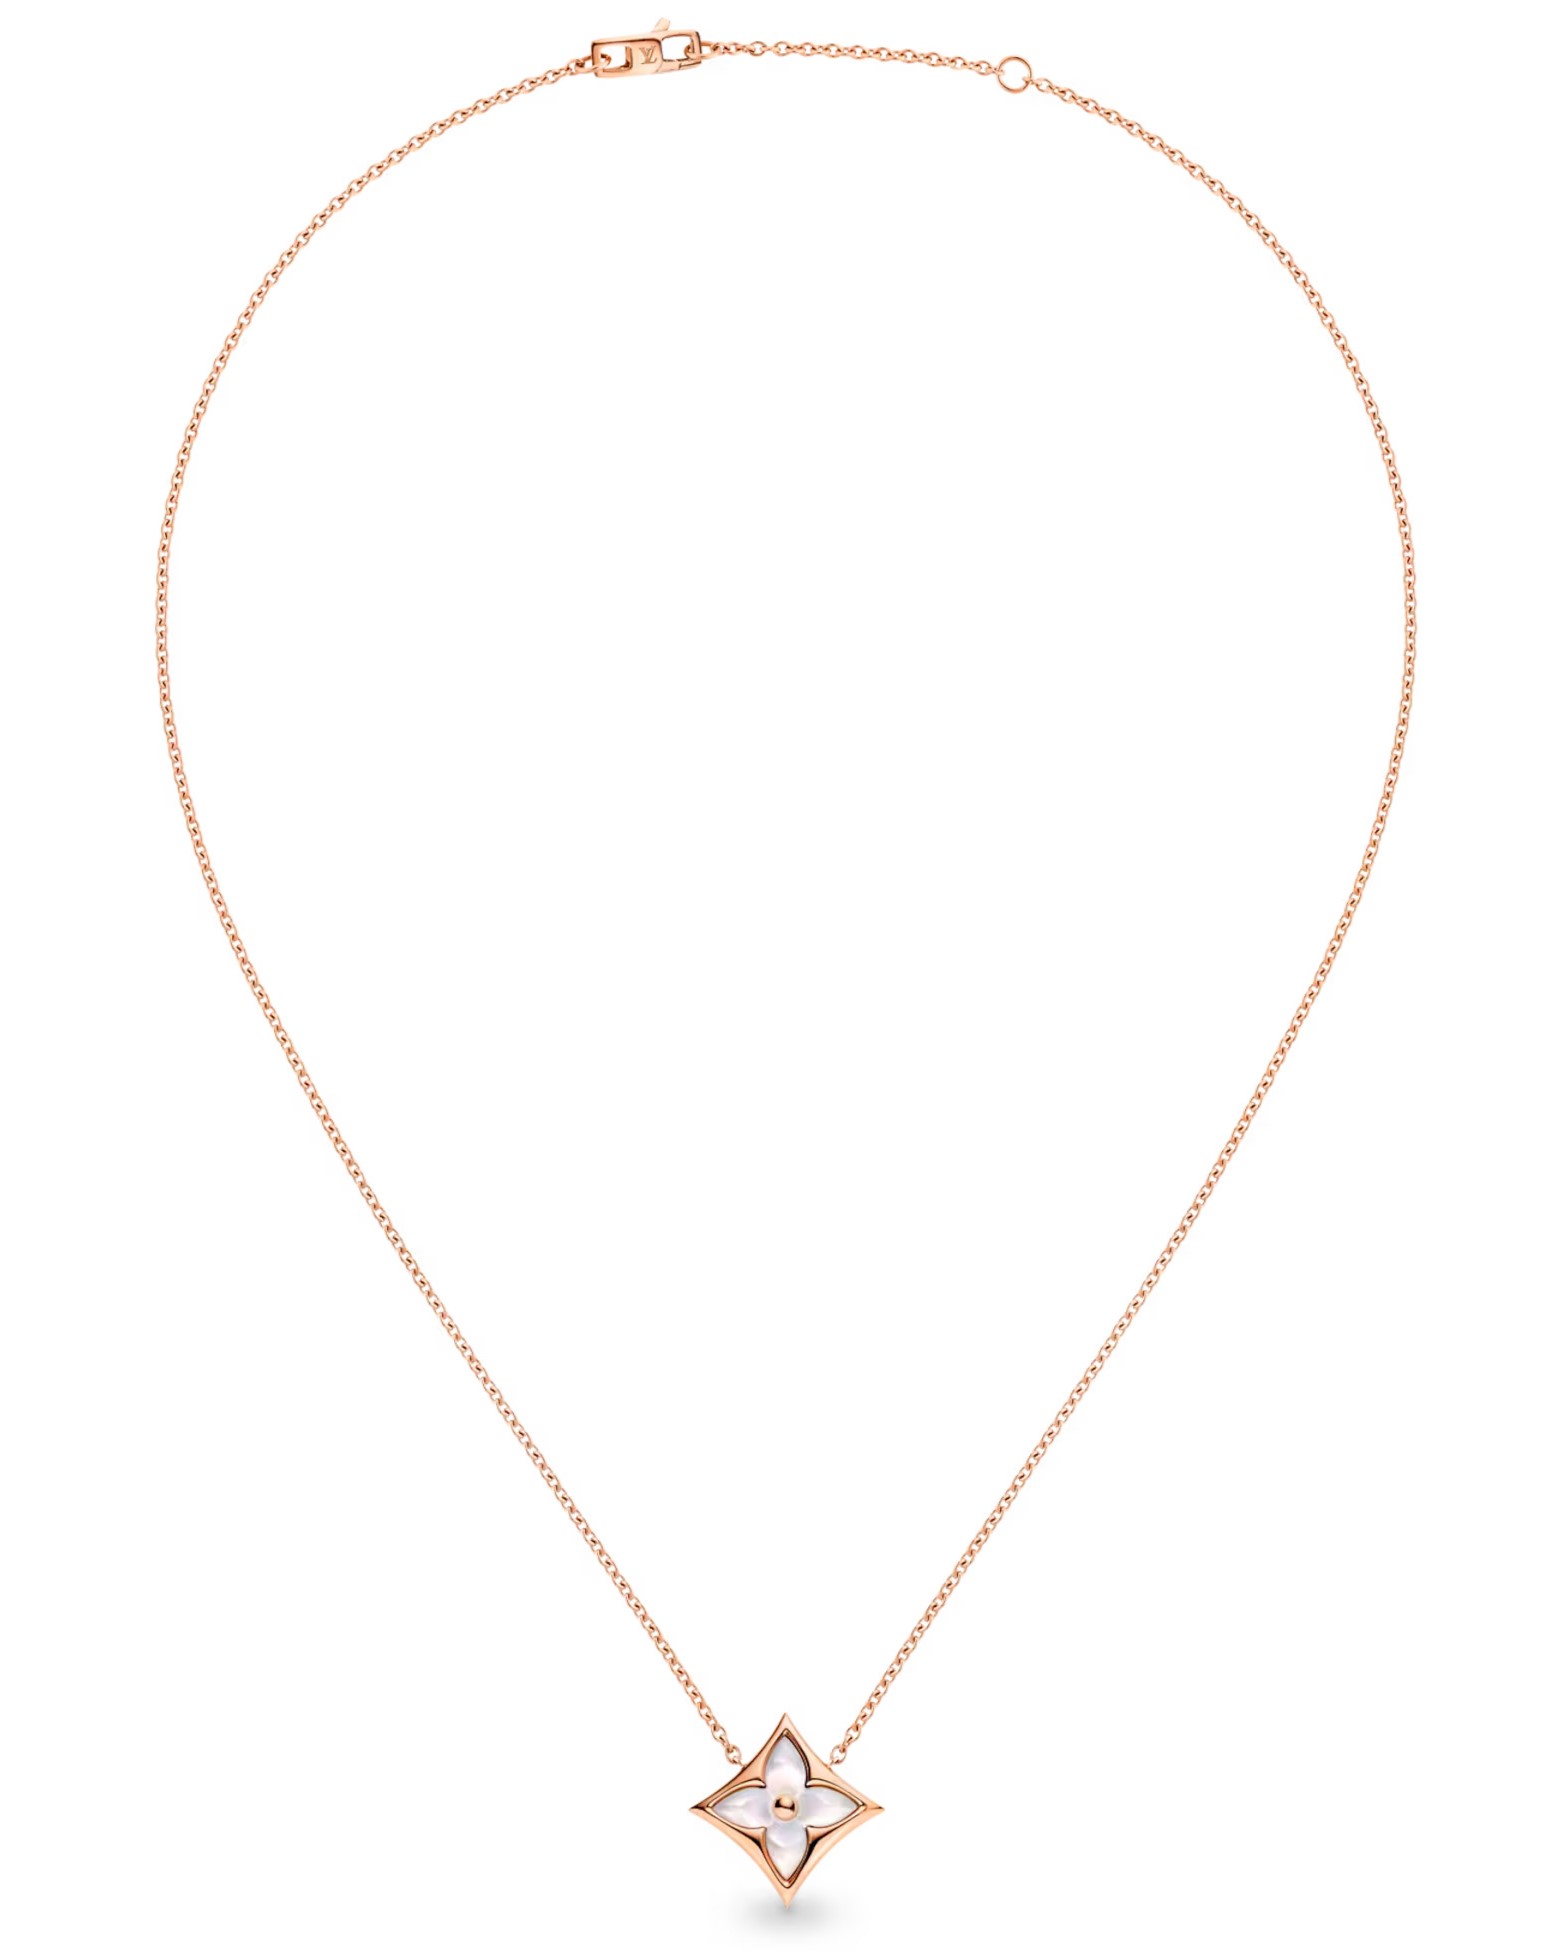 DÂY CHUYỀN THỜI TRANG LV LOUIS VUITTON COLOR BLOSSOM STAR PENDANT PINK GOLD AND WHITE MOTHER-OF-PEARL Q93521 3